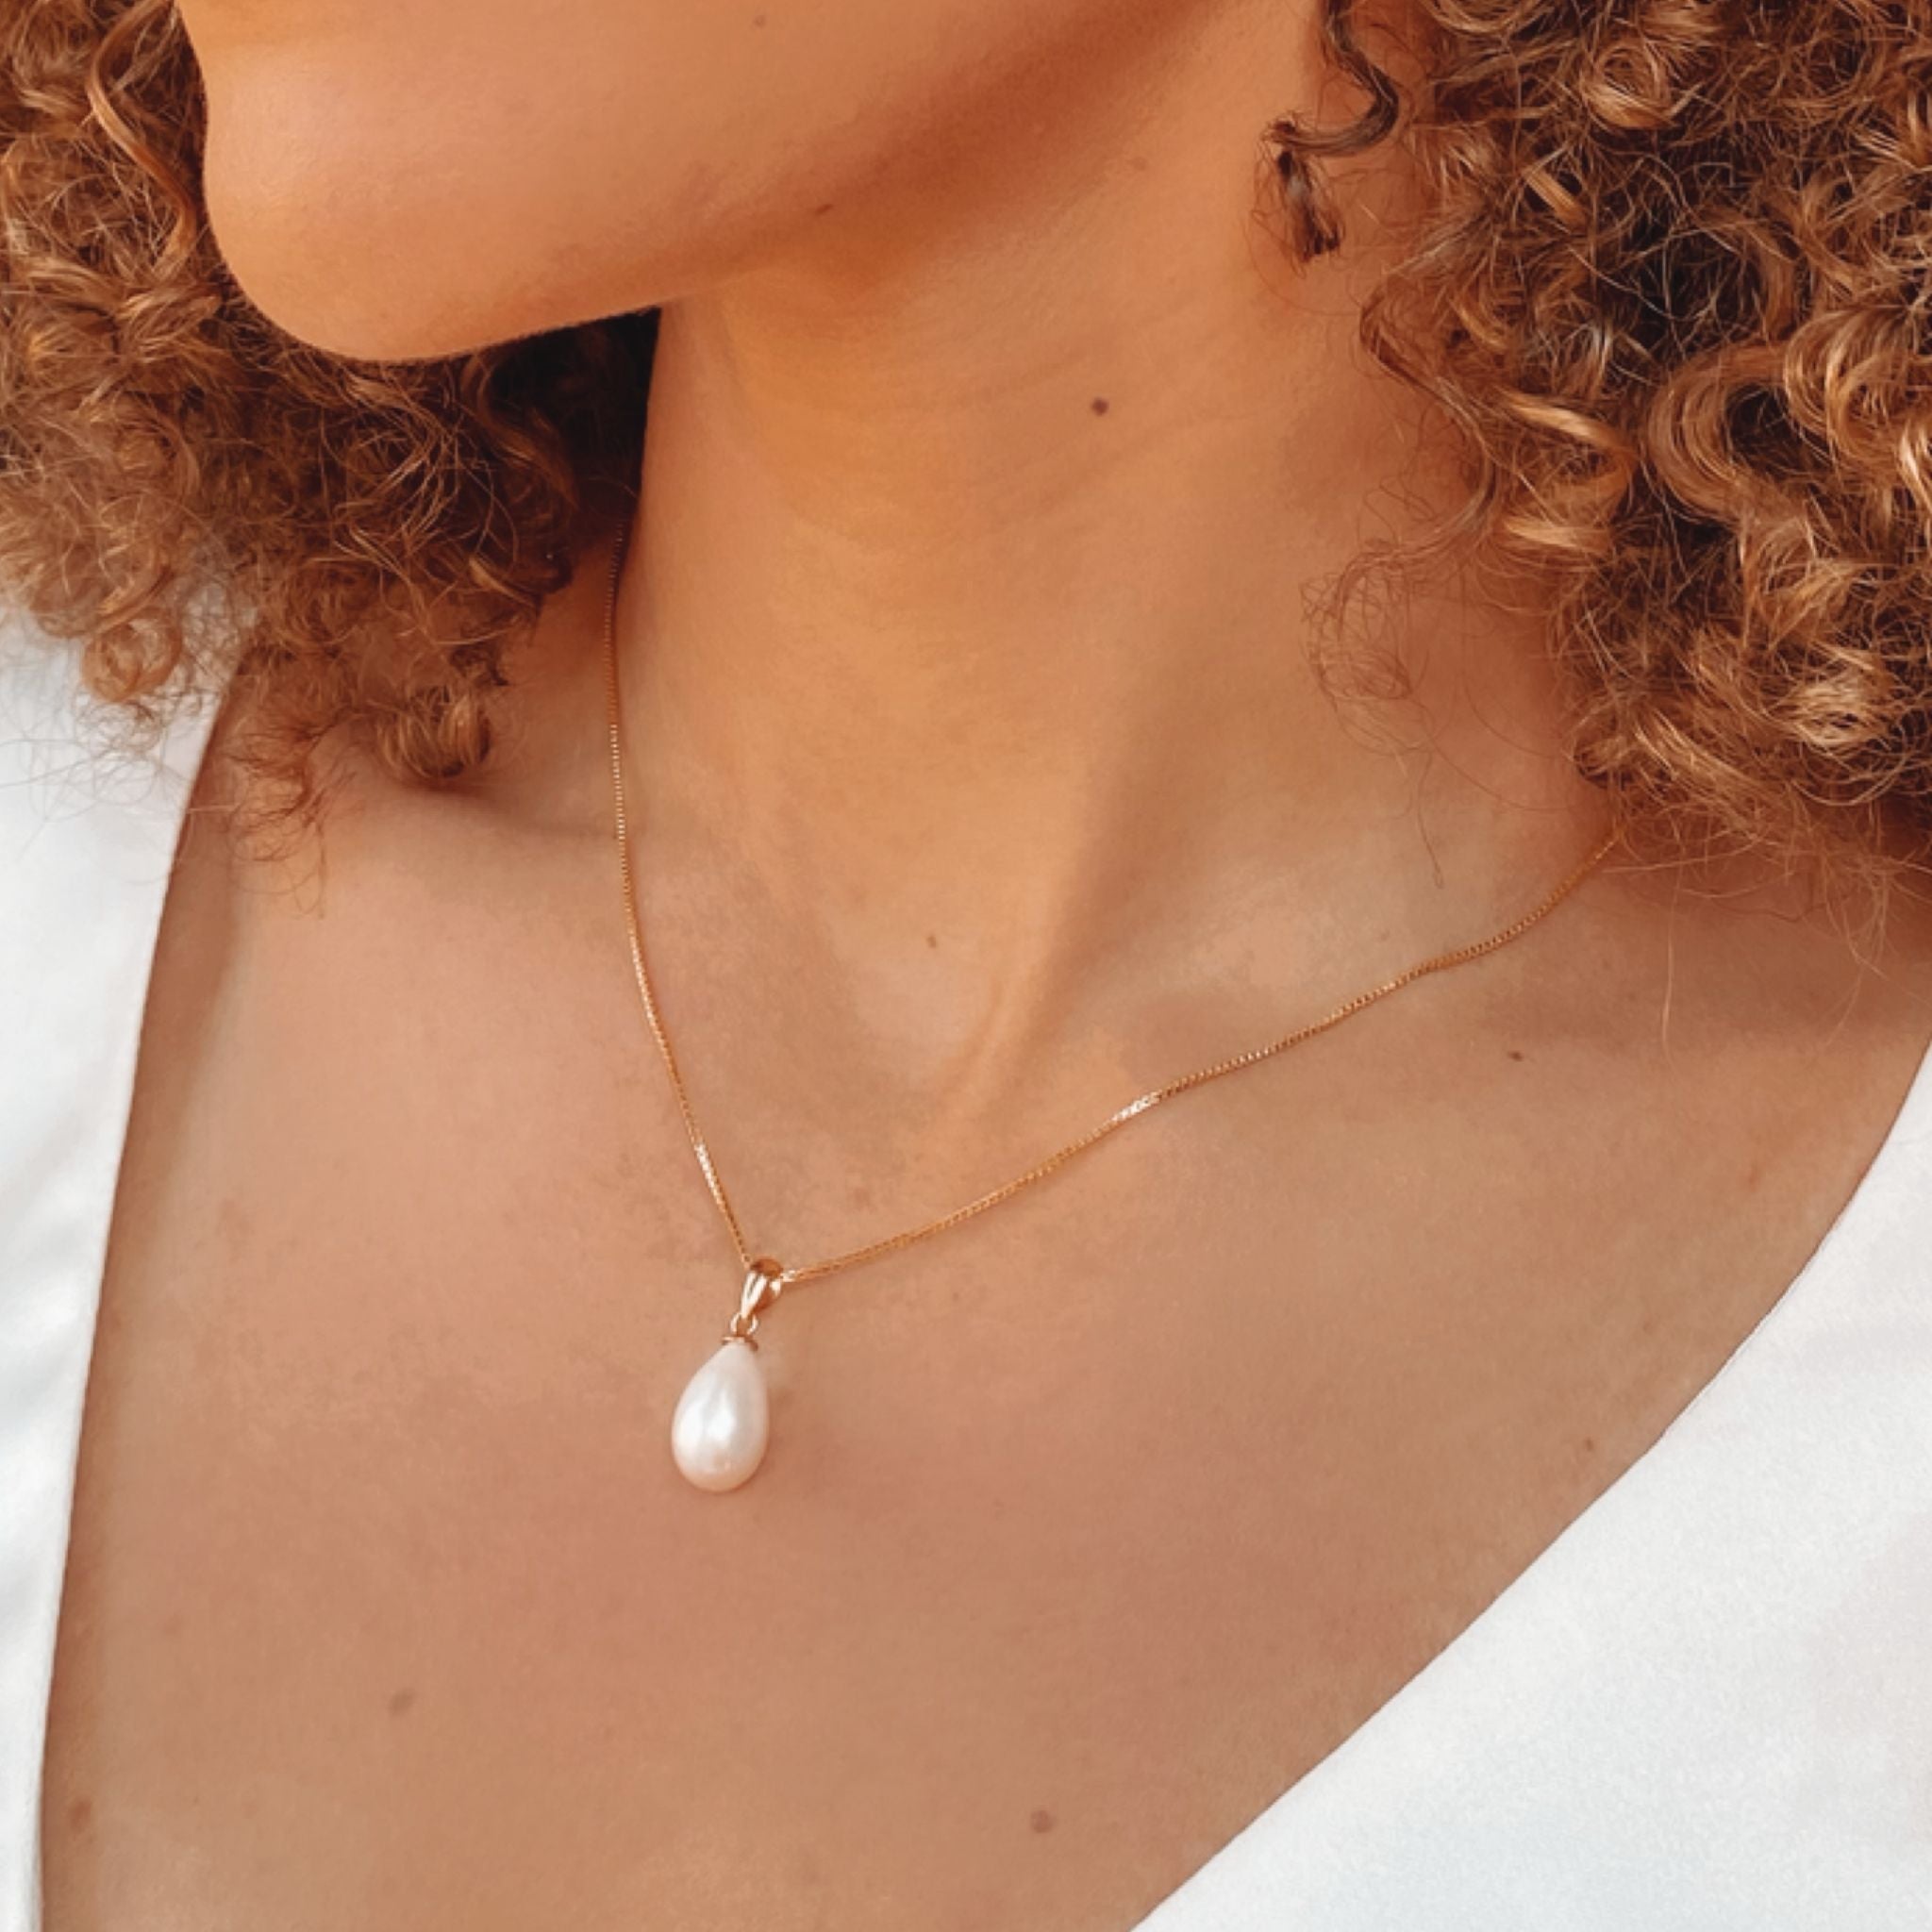 Teardrop Pearl Necklace, Small Pearl Floating Necklace, Freshwater Drop  Pearl Charm Necklace, Silver June Birthstone, Gold Bridesmaid Gifts - Etsy